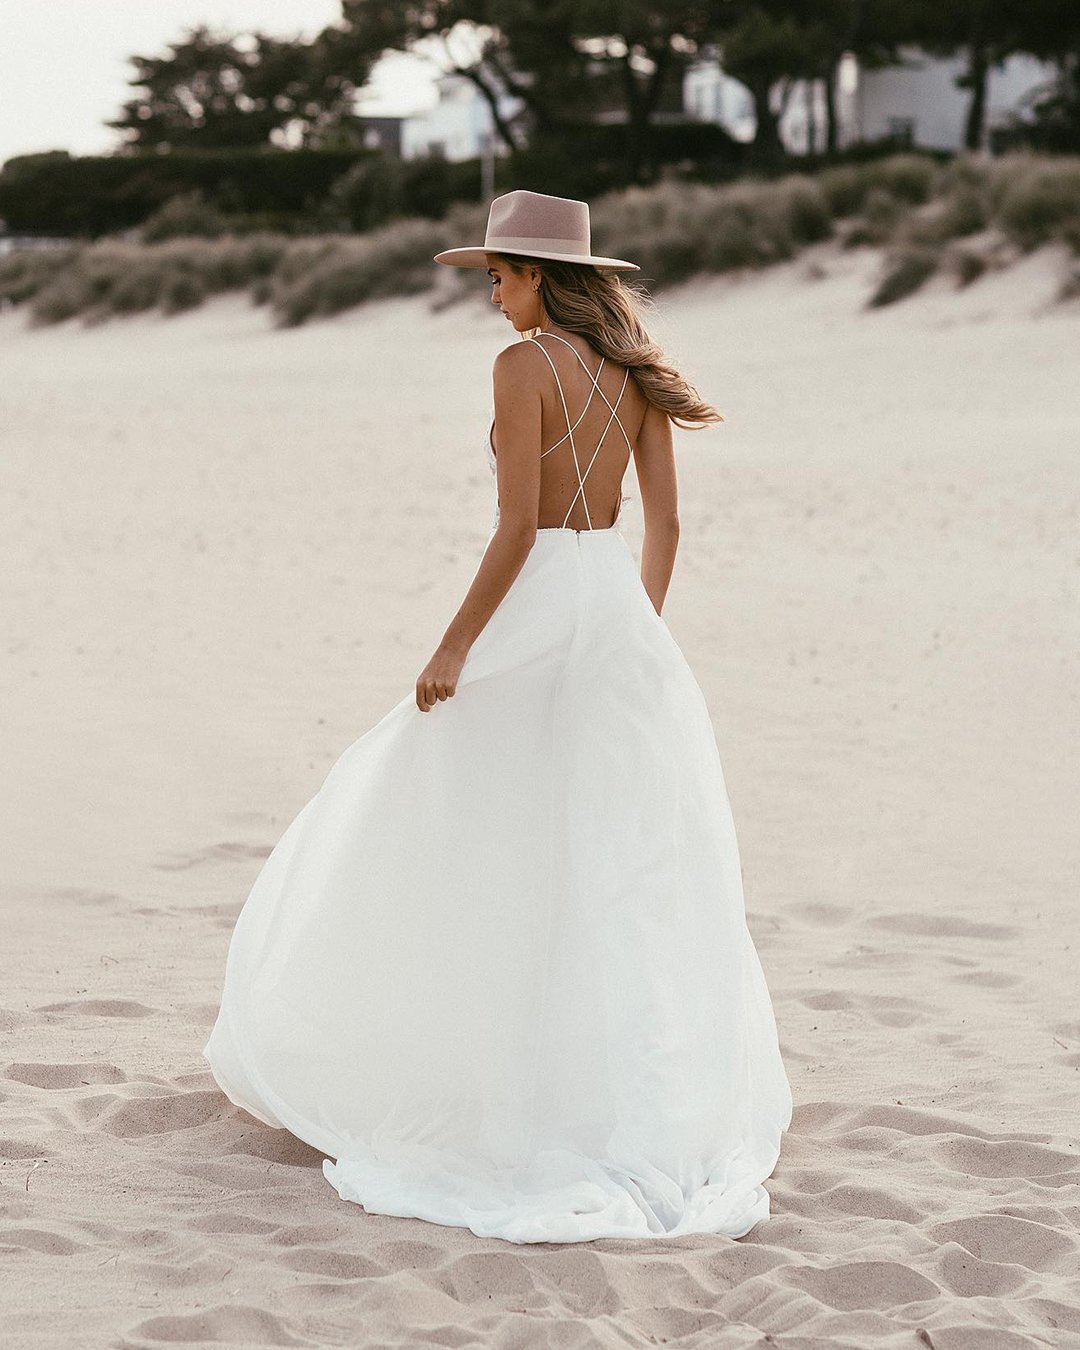 backless wedding dresses simple beach sexy with hat chelseawhitephotog